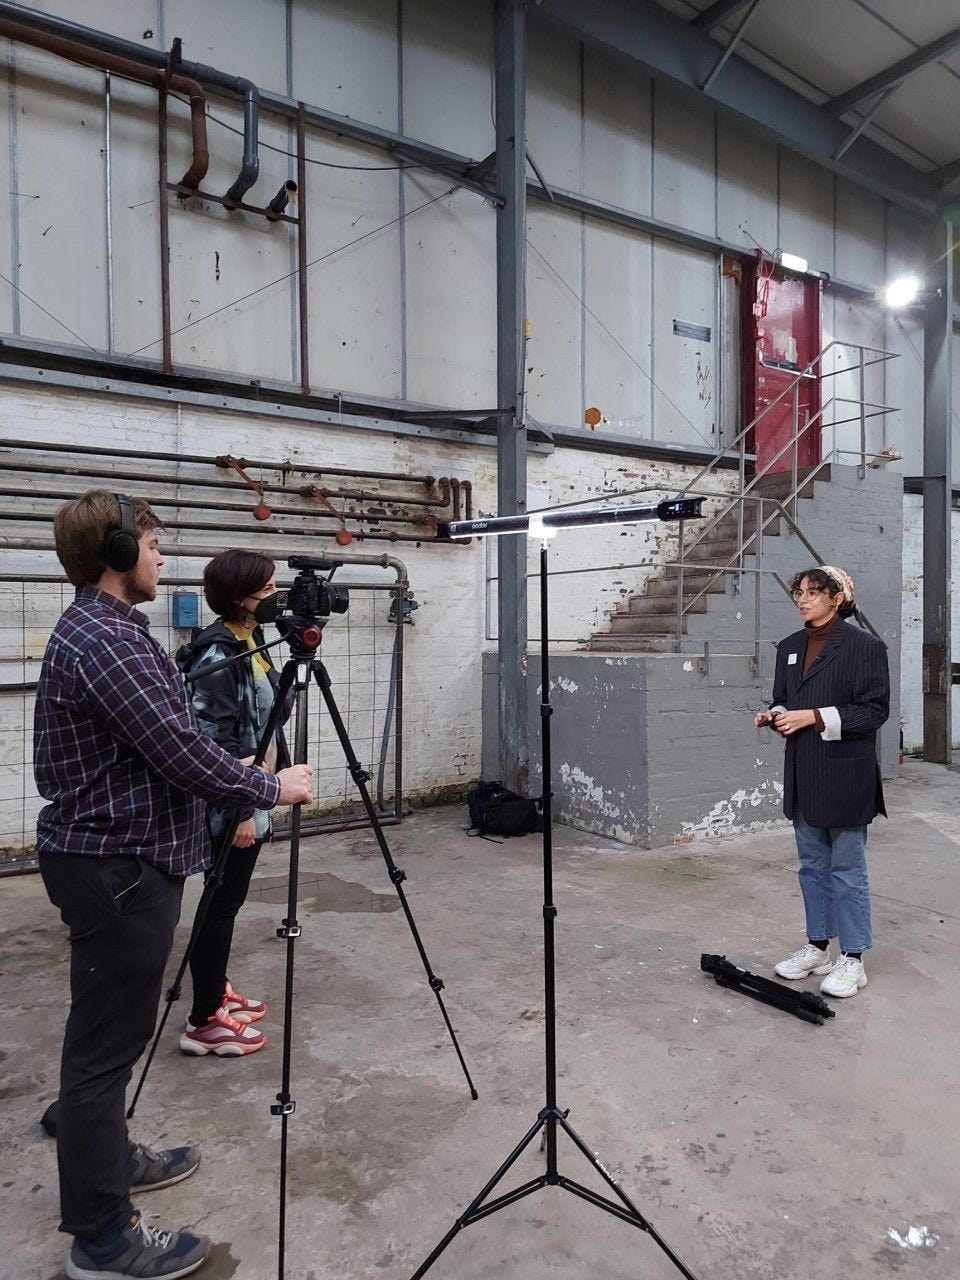 Hajar, a young Muslim woman in a black suit jacket and blue jeans, talks to a camera with two camera-people filming. They are in a warehouse.